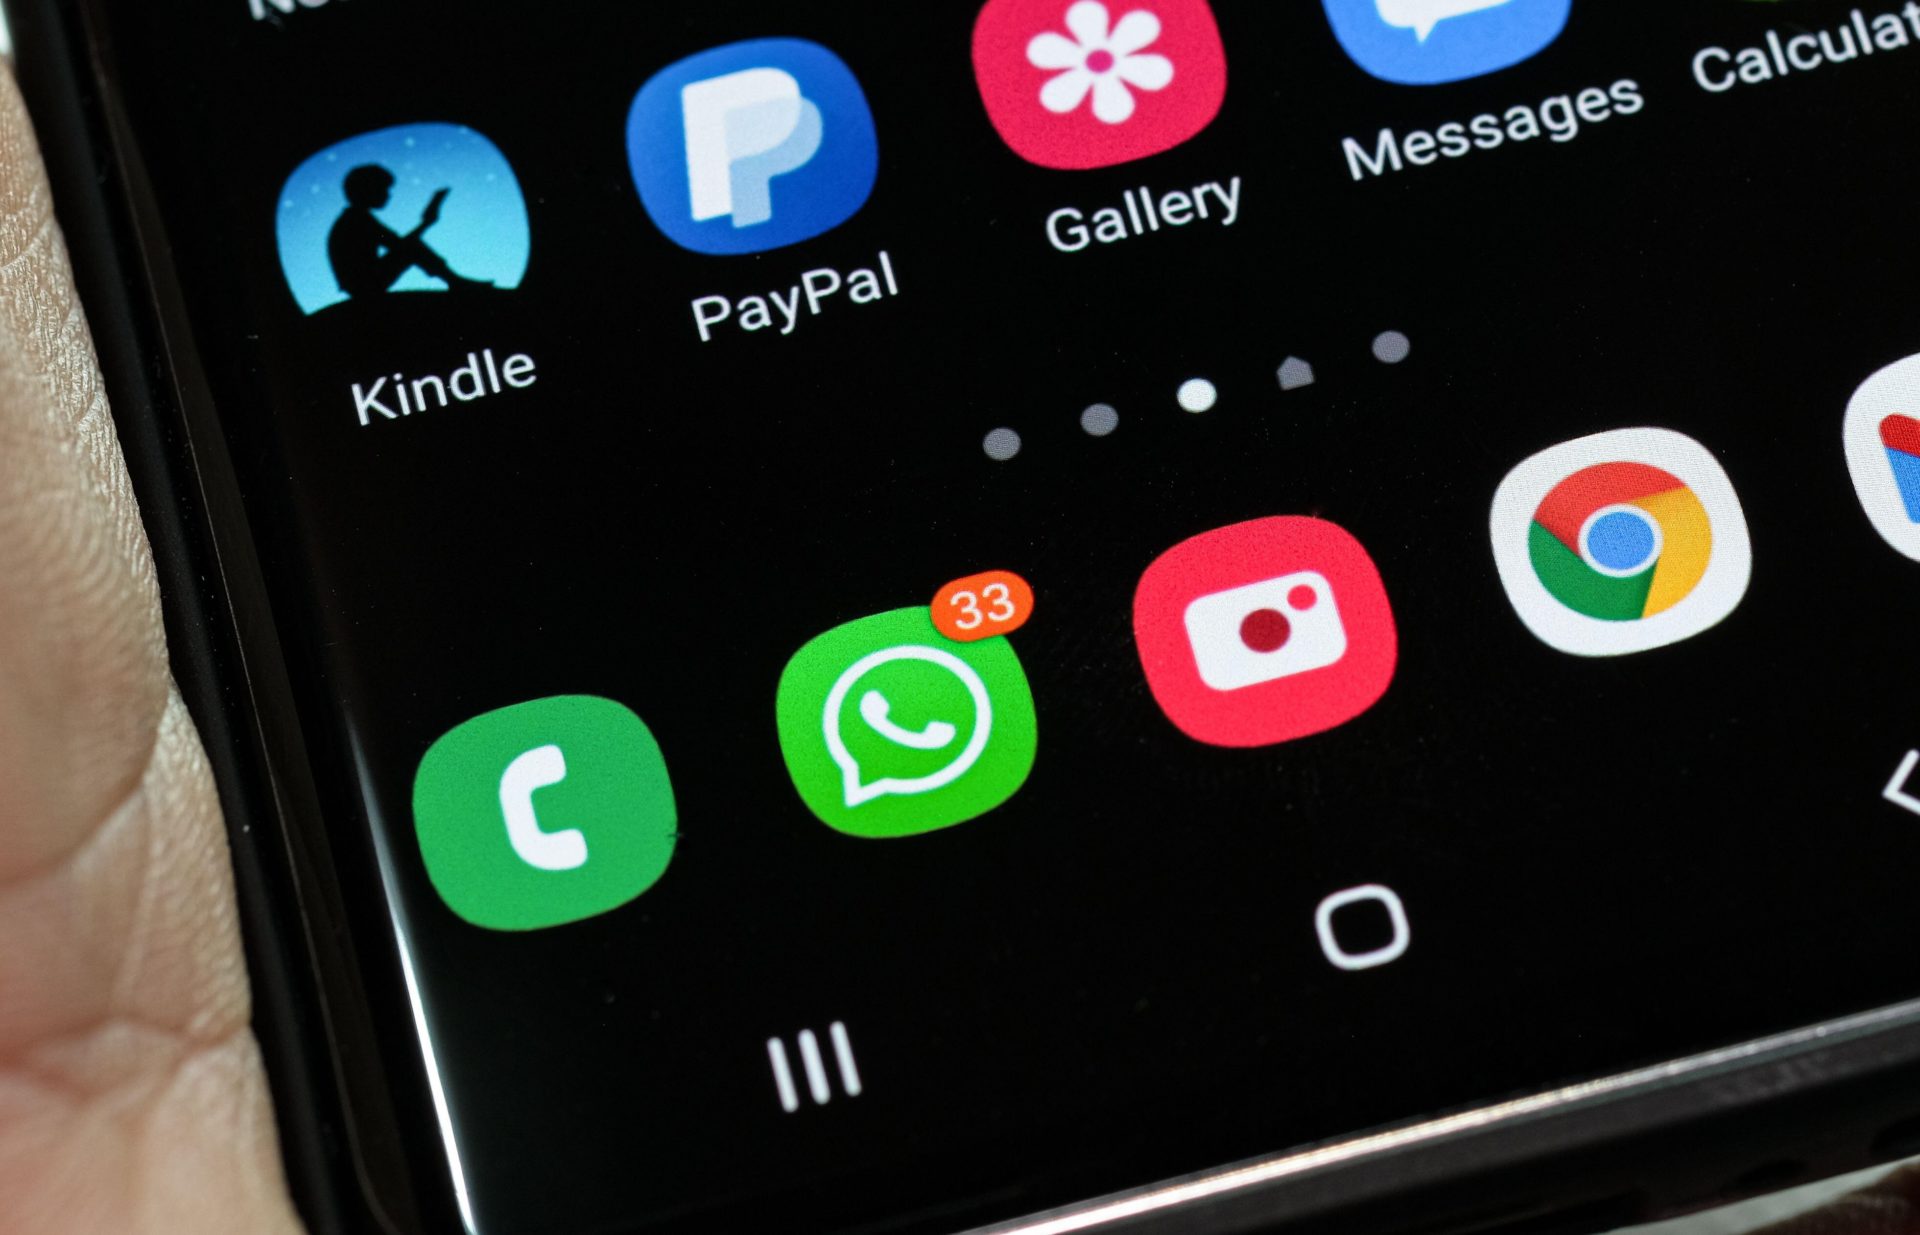 A WhatsApp icon on a smartphone showing message notifications, 2-4-21.